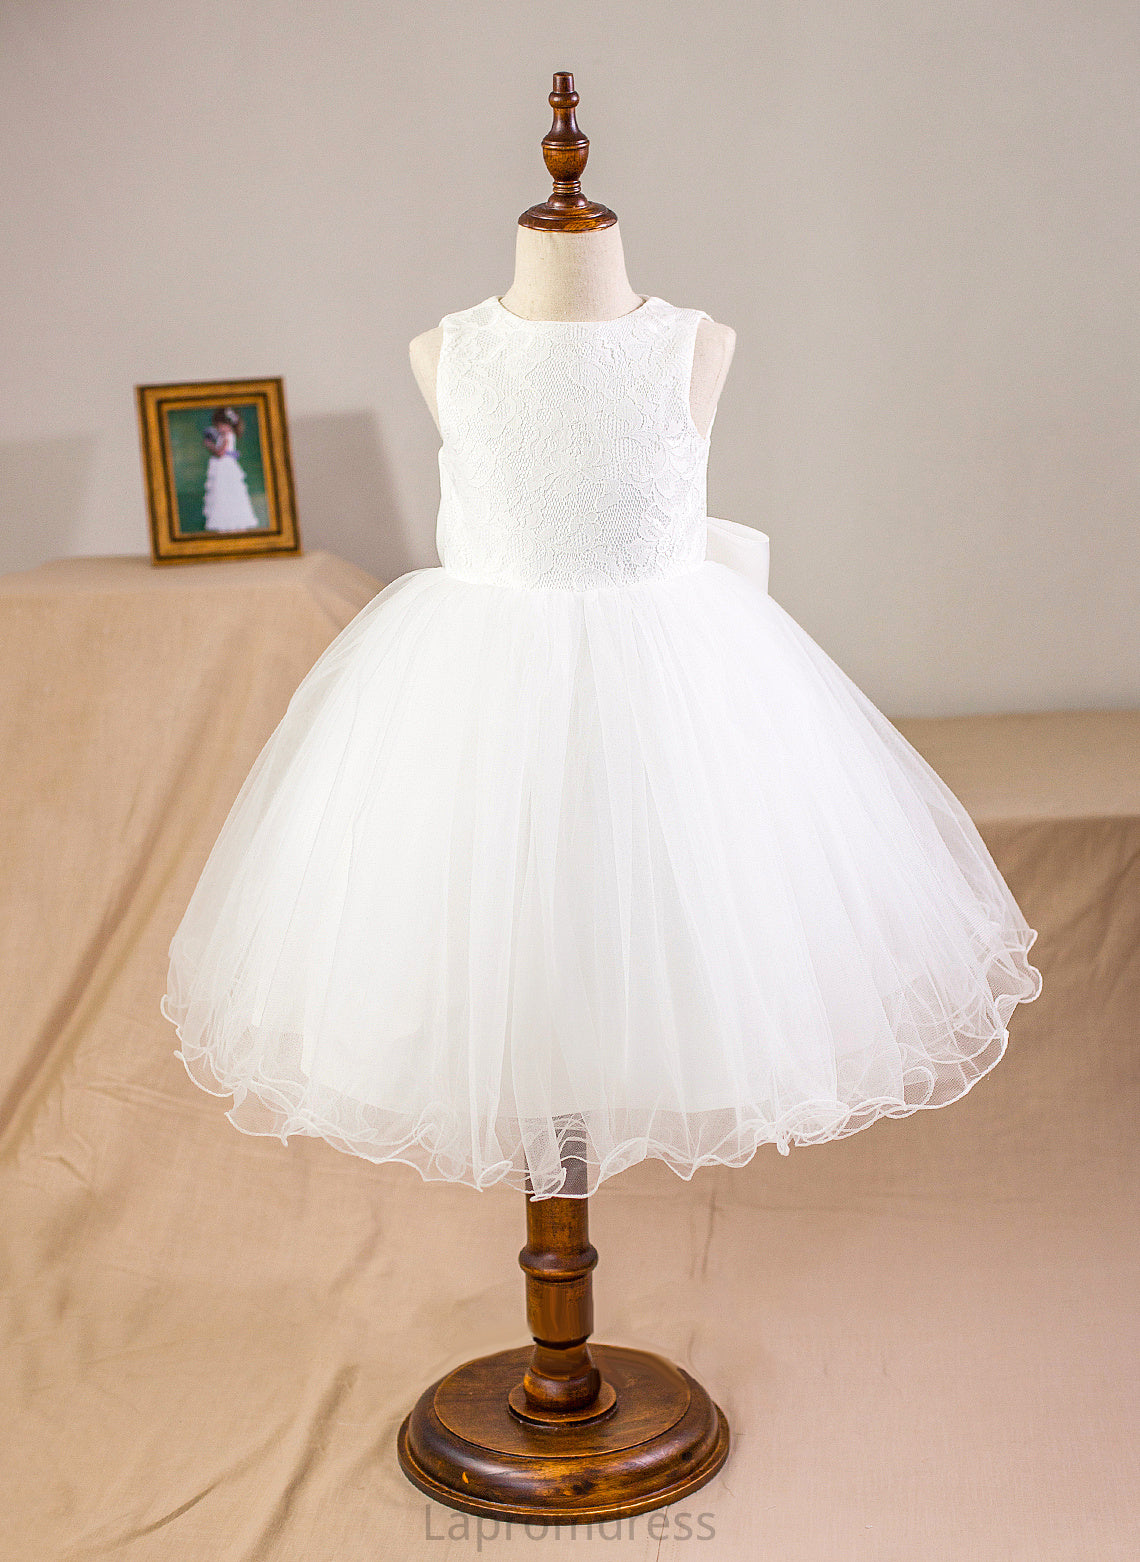 Carlie Bow(s) Sleeveless Flower Girl Dresses With Neck Ball-Gown/Princess Dress Flower Scoop Girl Satin/Tulle/Lace - Knee-length